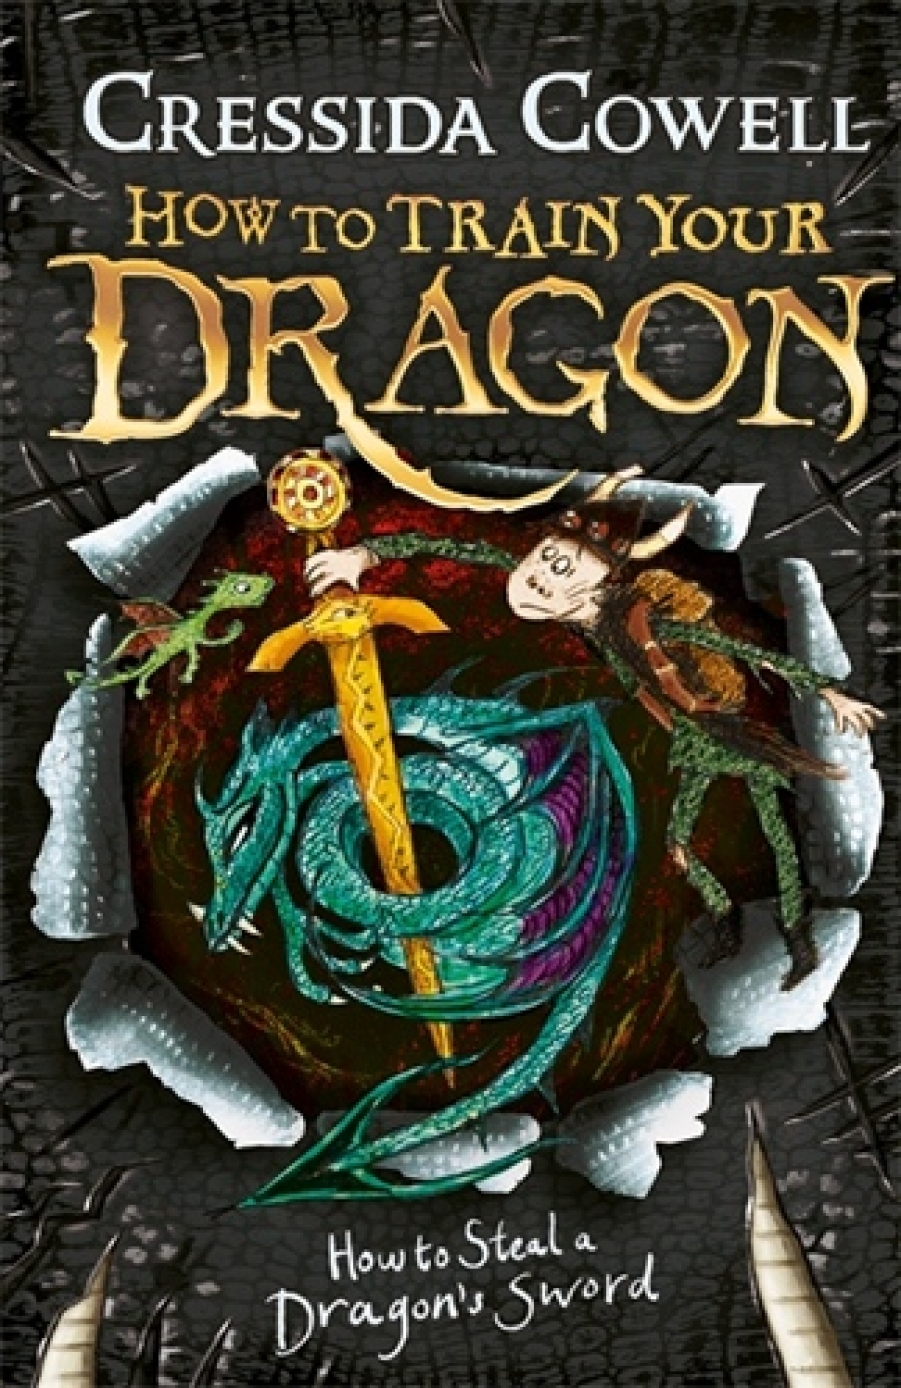 Cowell, Cressida How to Steal a Dragon's Sword 